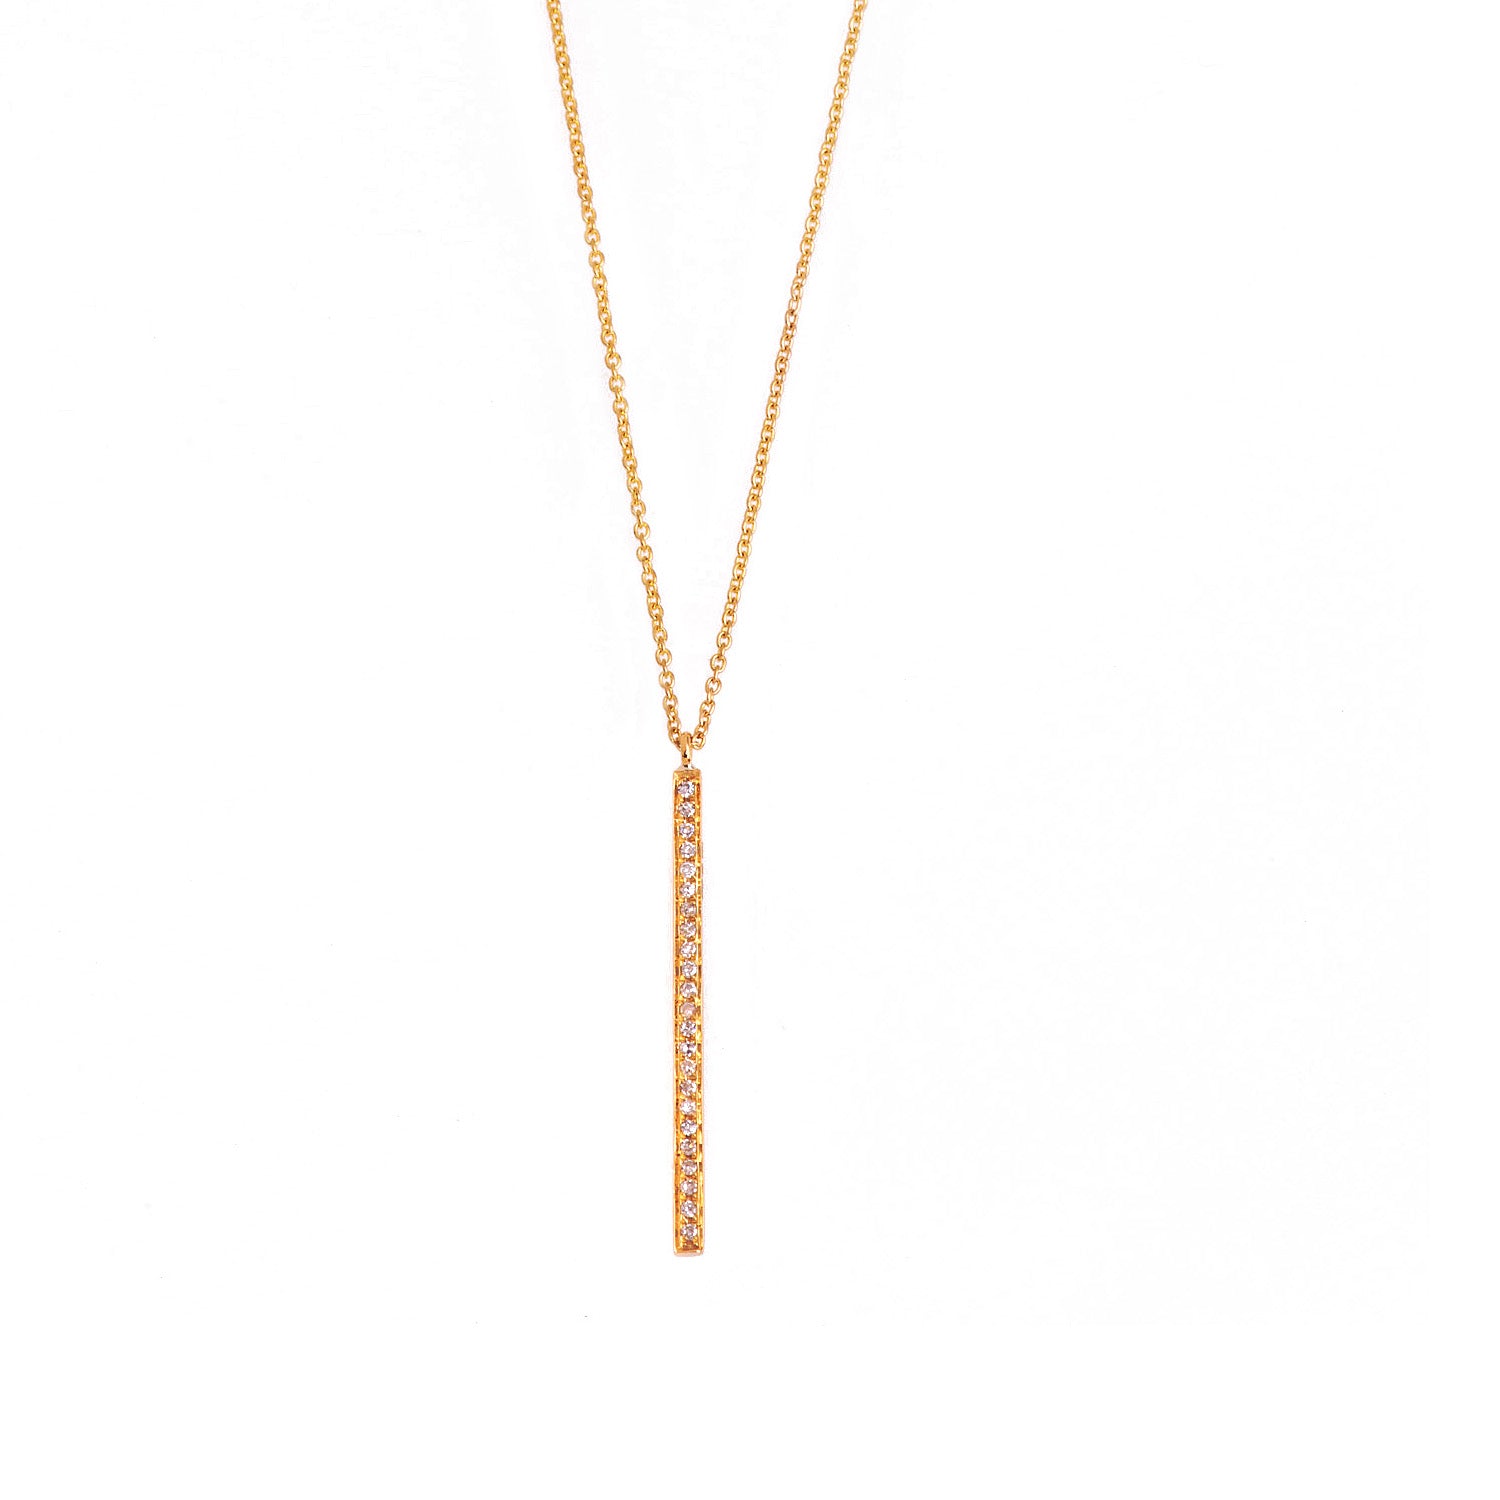 Gold and Diamond necklace. Diamond line necklace. Yellow gold necklace. Χρυσό κολιέ. Κολιέ με διαμάντια. Γραμμή με διαμάντια.